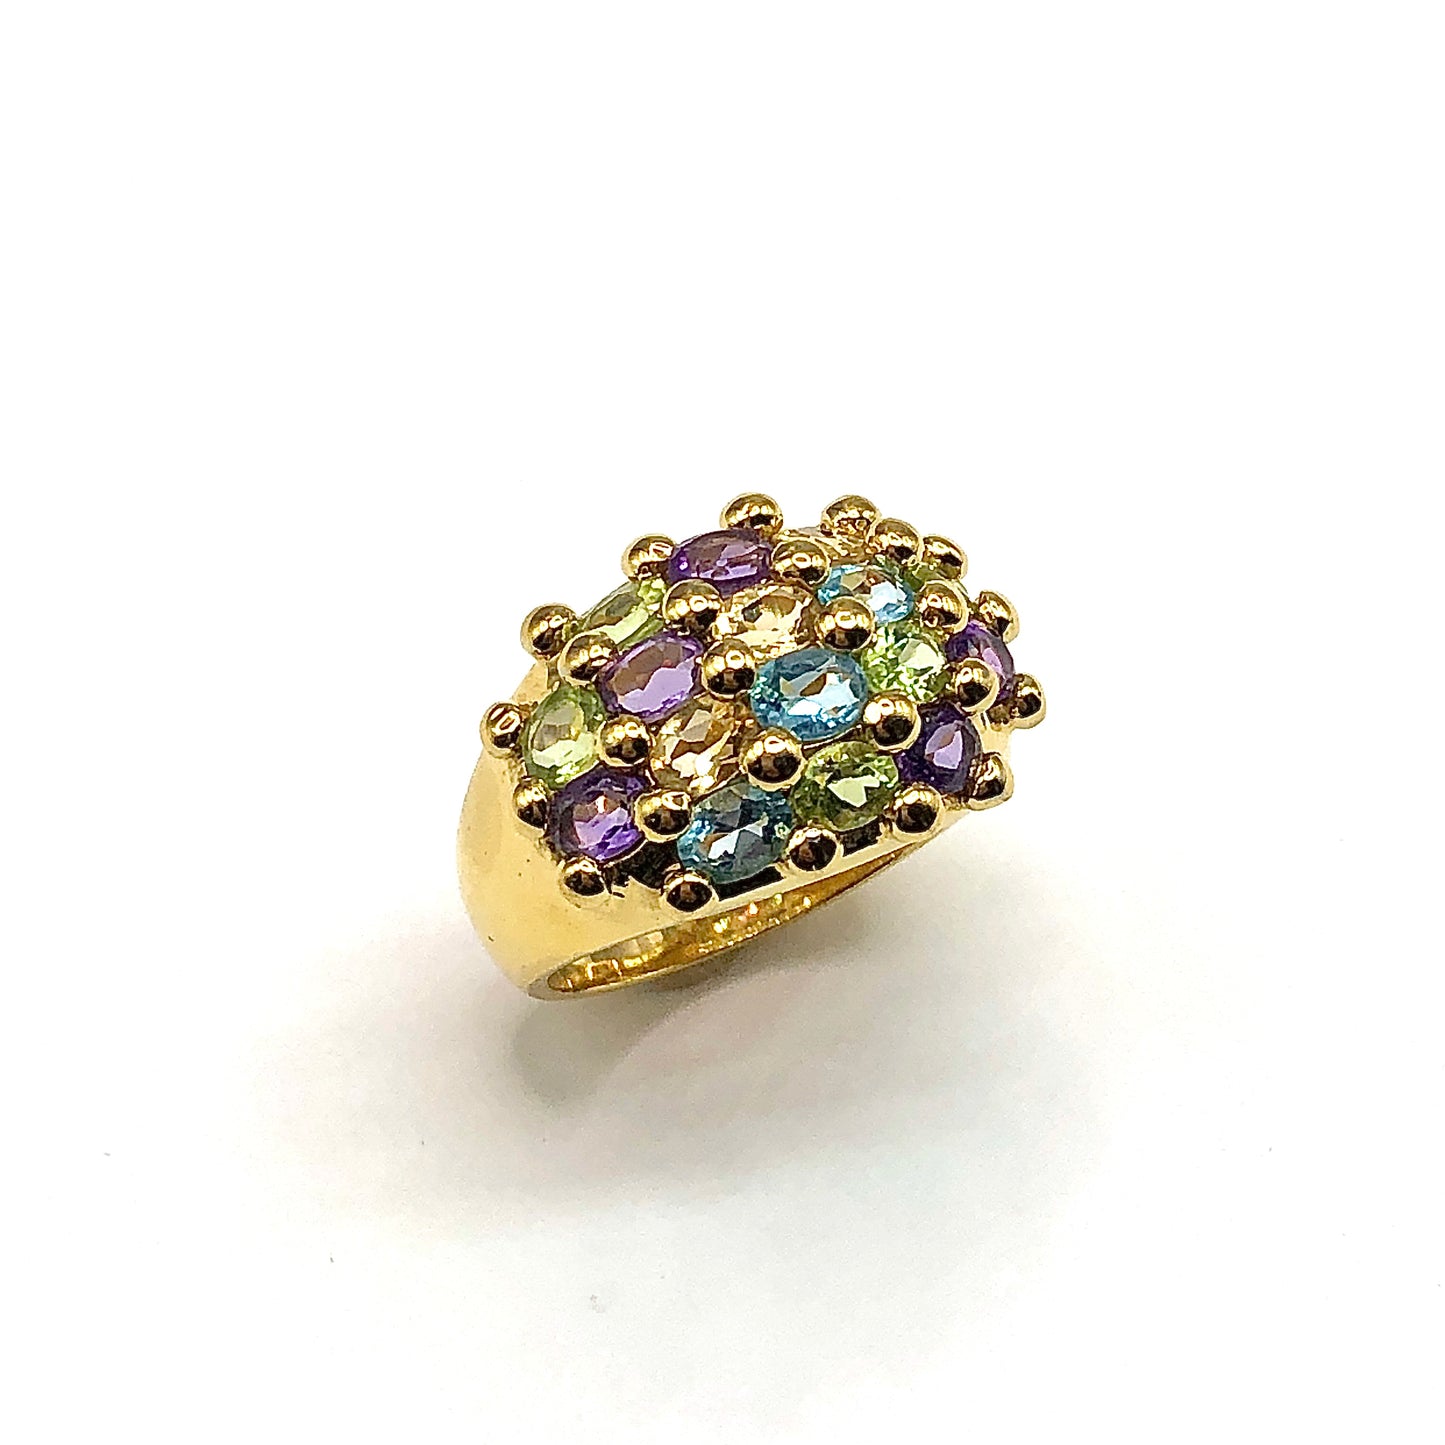 Gold Gemstone Ring, Perfectly Imperfect - Wide Domed Multi Stone Sterling Silver Gold Cocktail Ring size 7.25 - Estate Jewelry